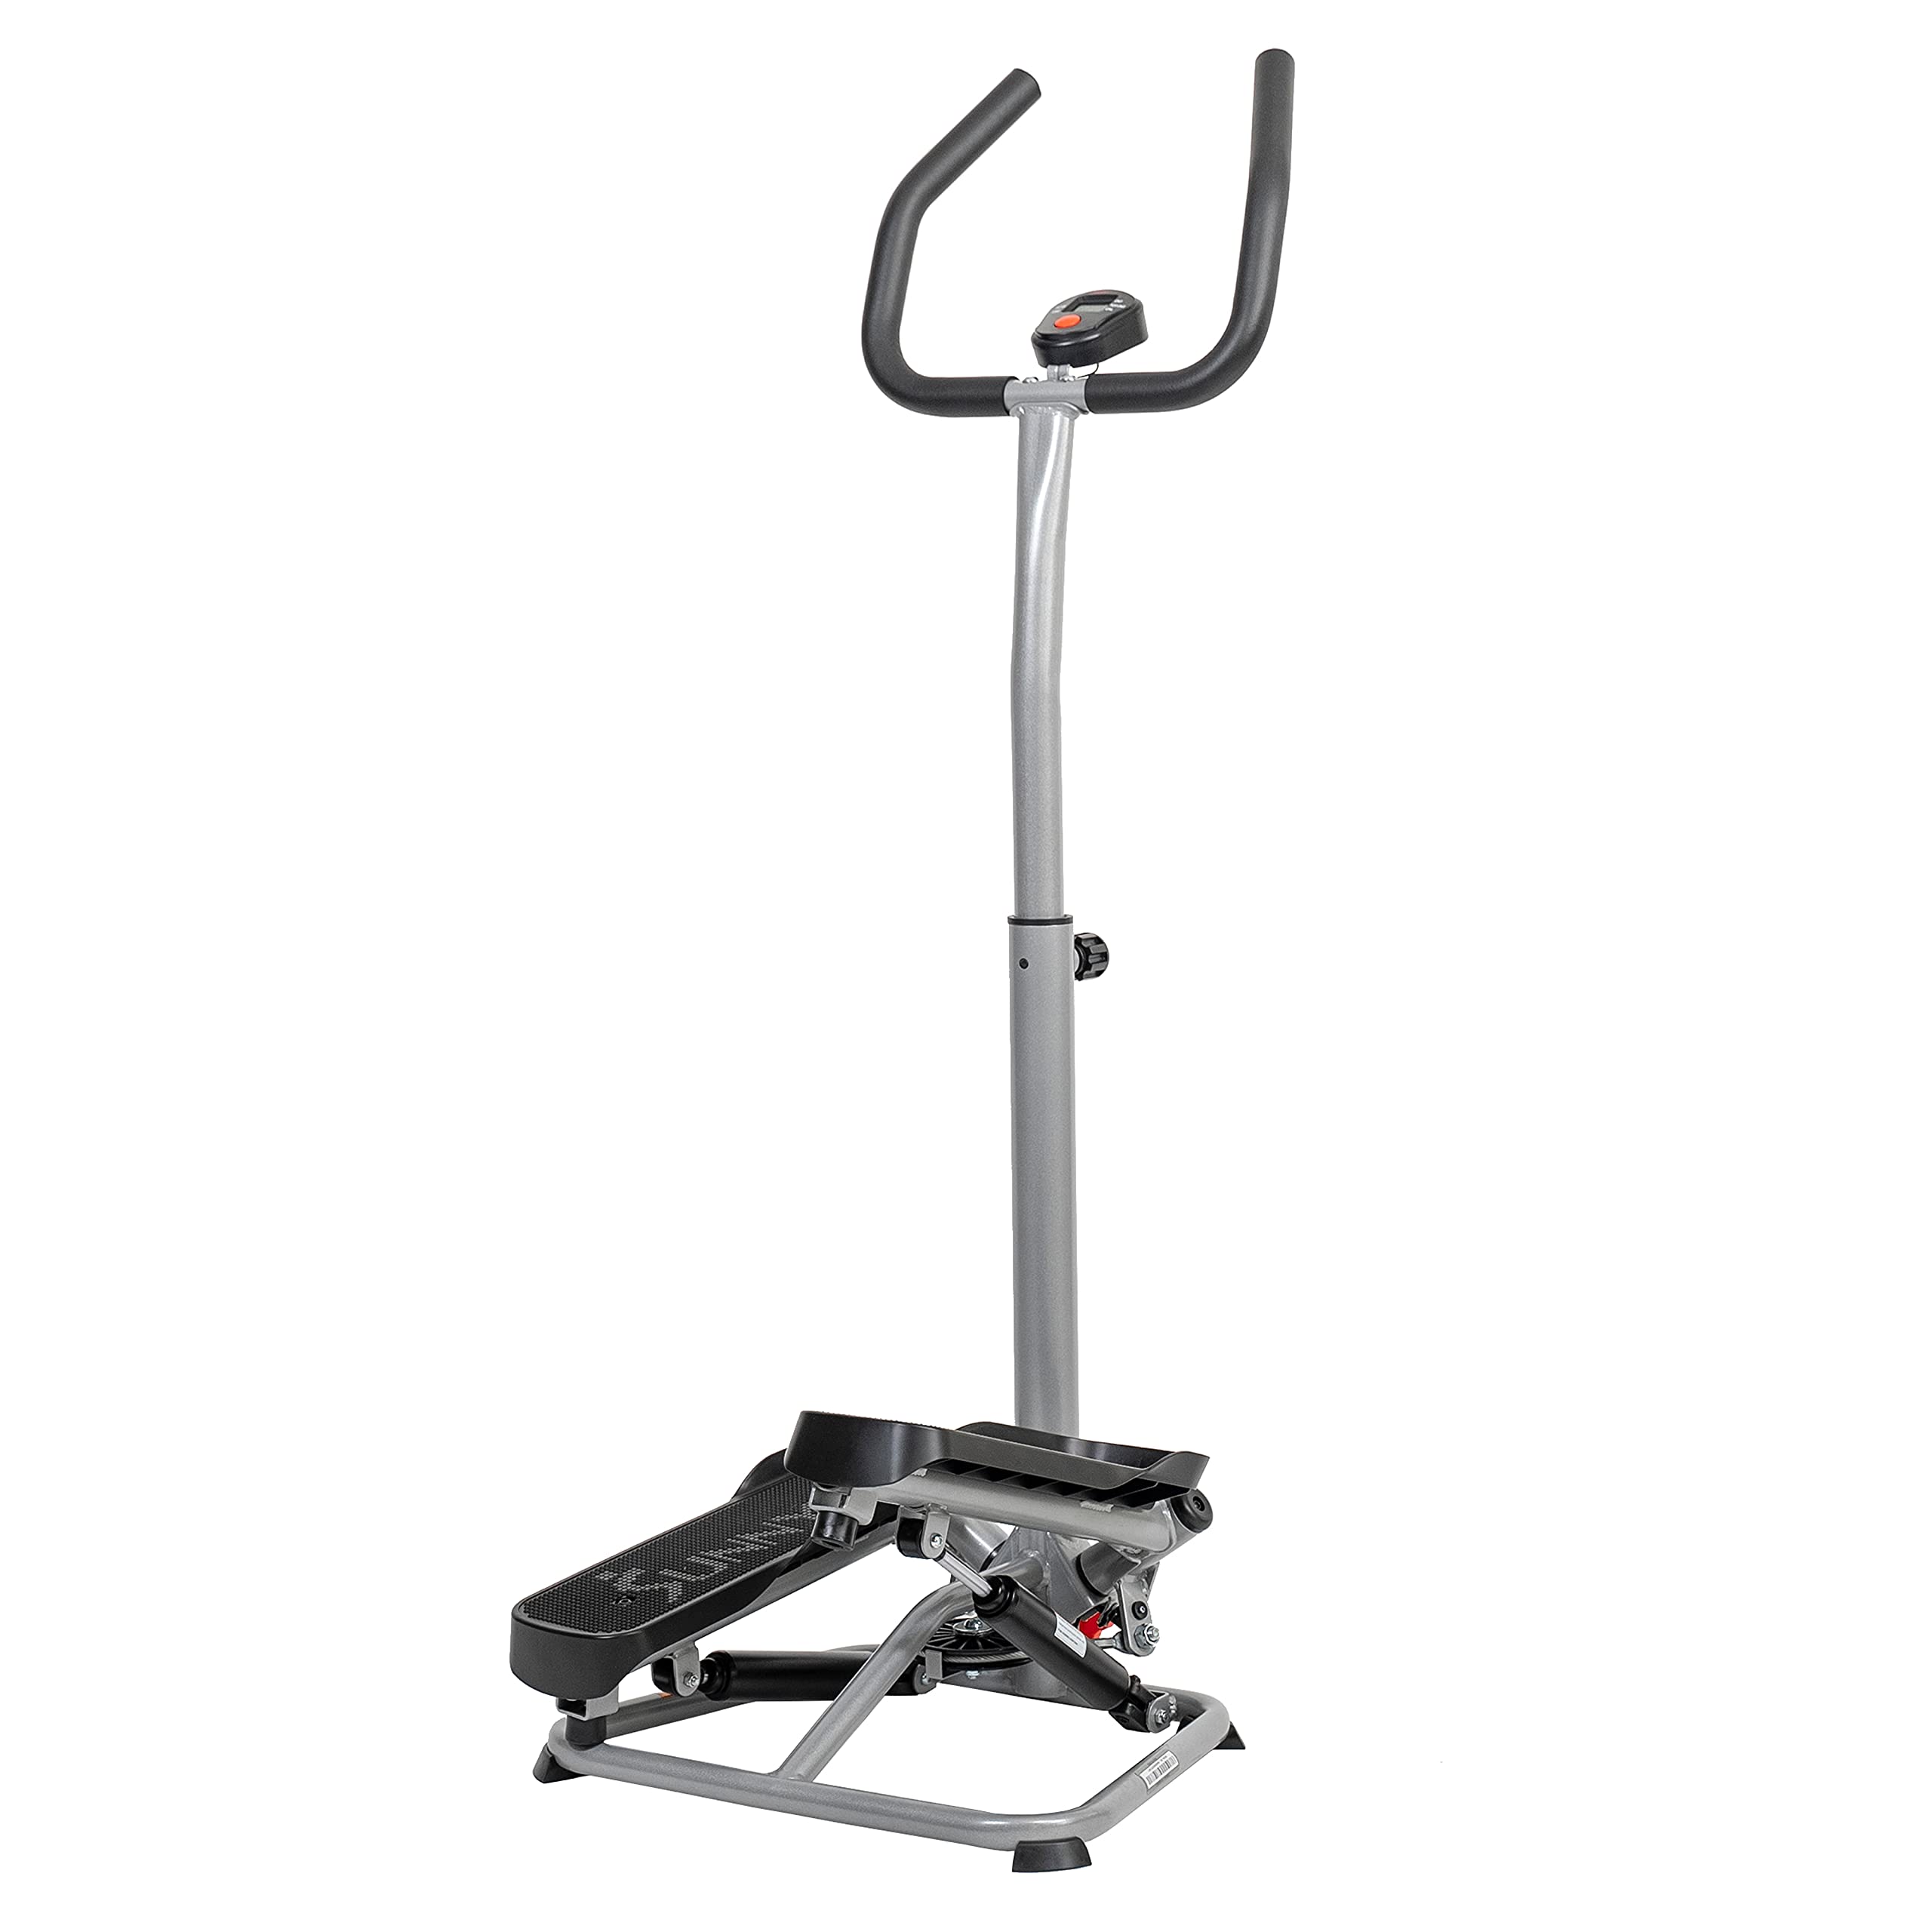 Sunny Health & Fitness Twisting Stair Stepper Machine with Handlebar and Digital Display